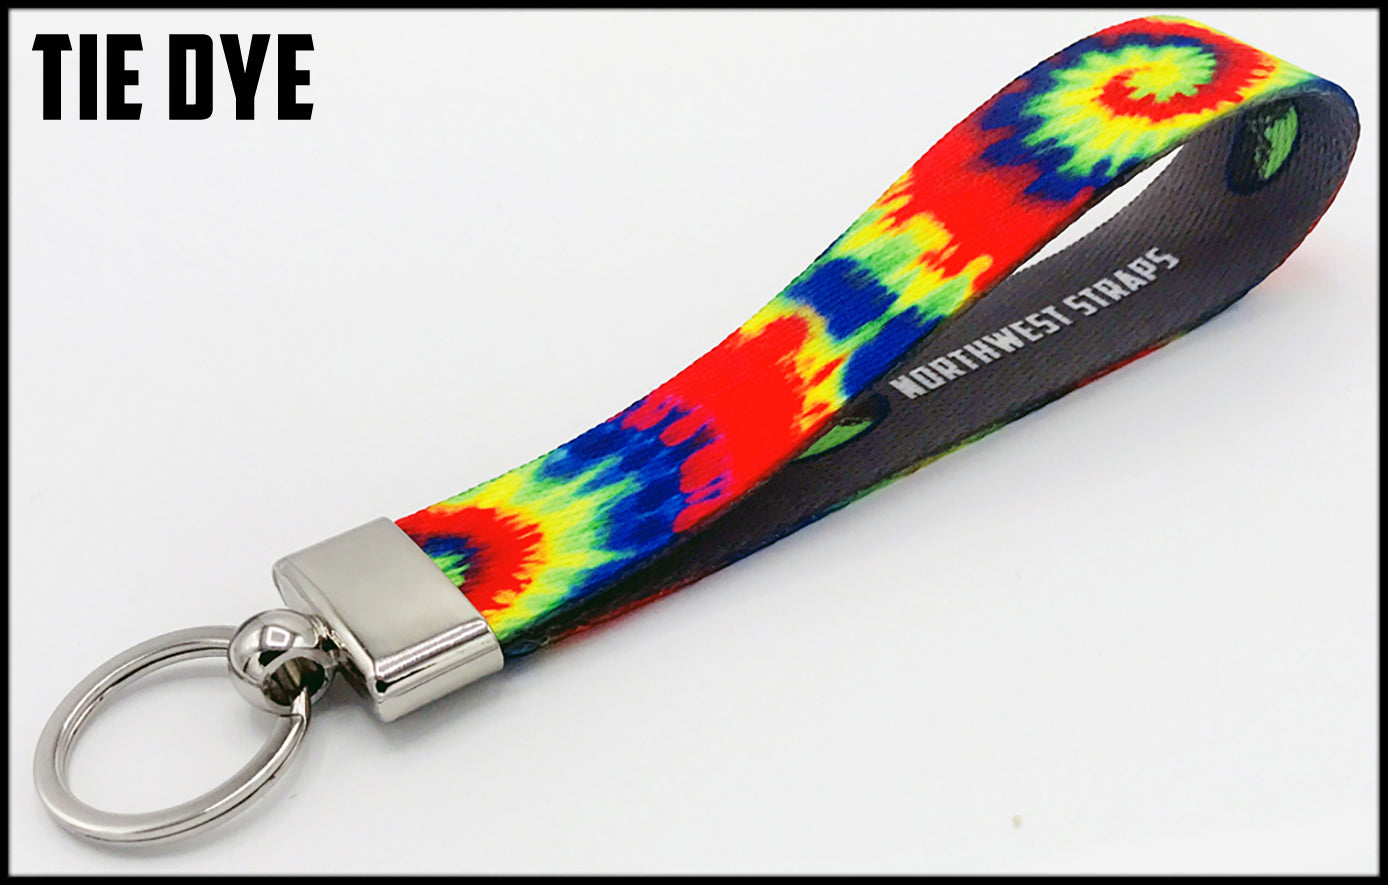 Red green yellow blue tie dye. 1 inch custom picture quality polyester webbing keyfob. Design by Northwest Straps.